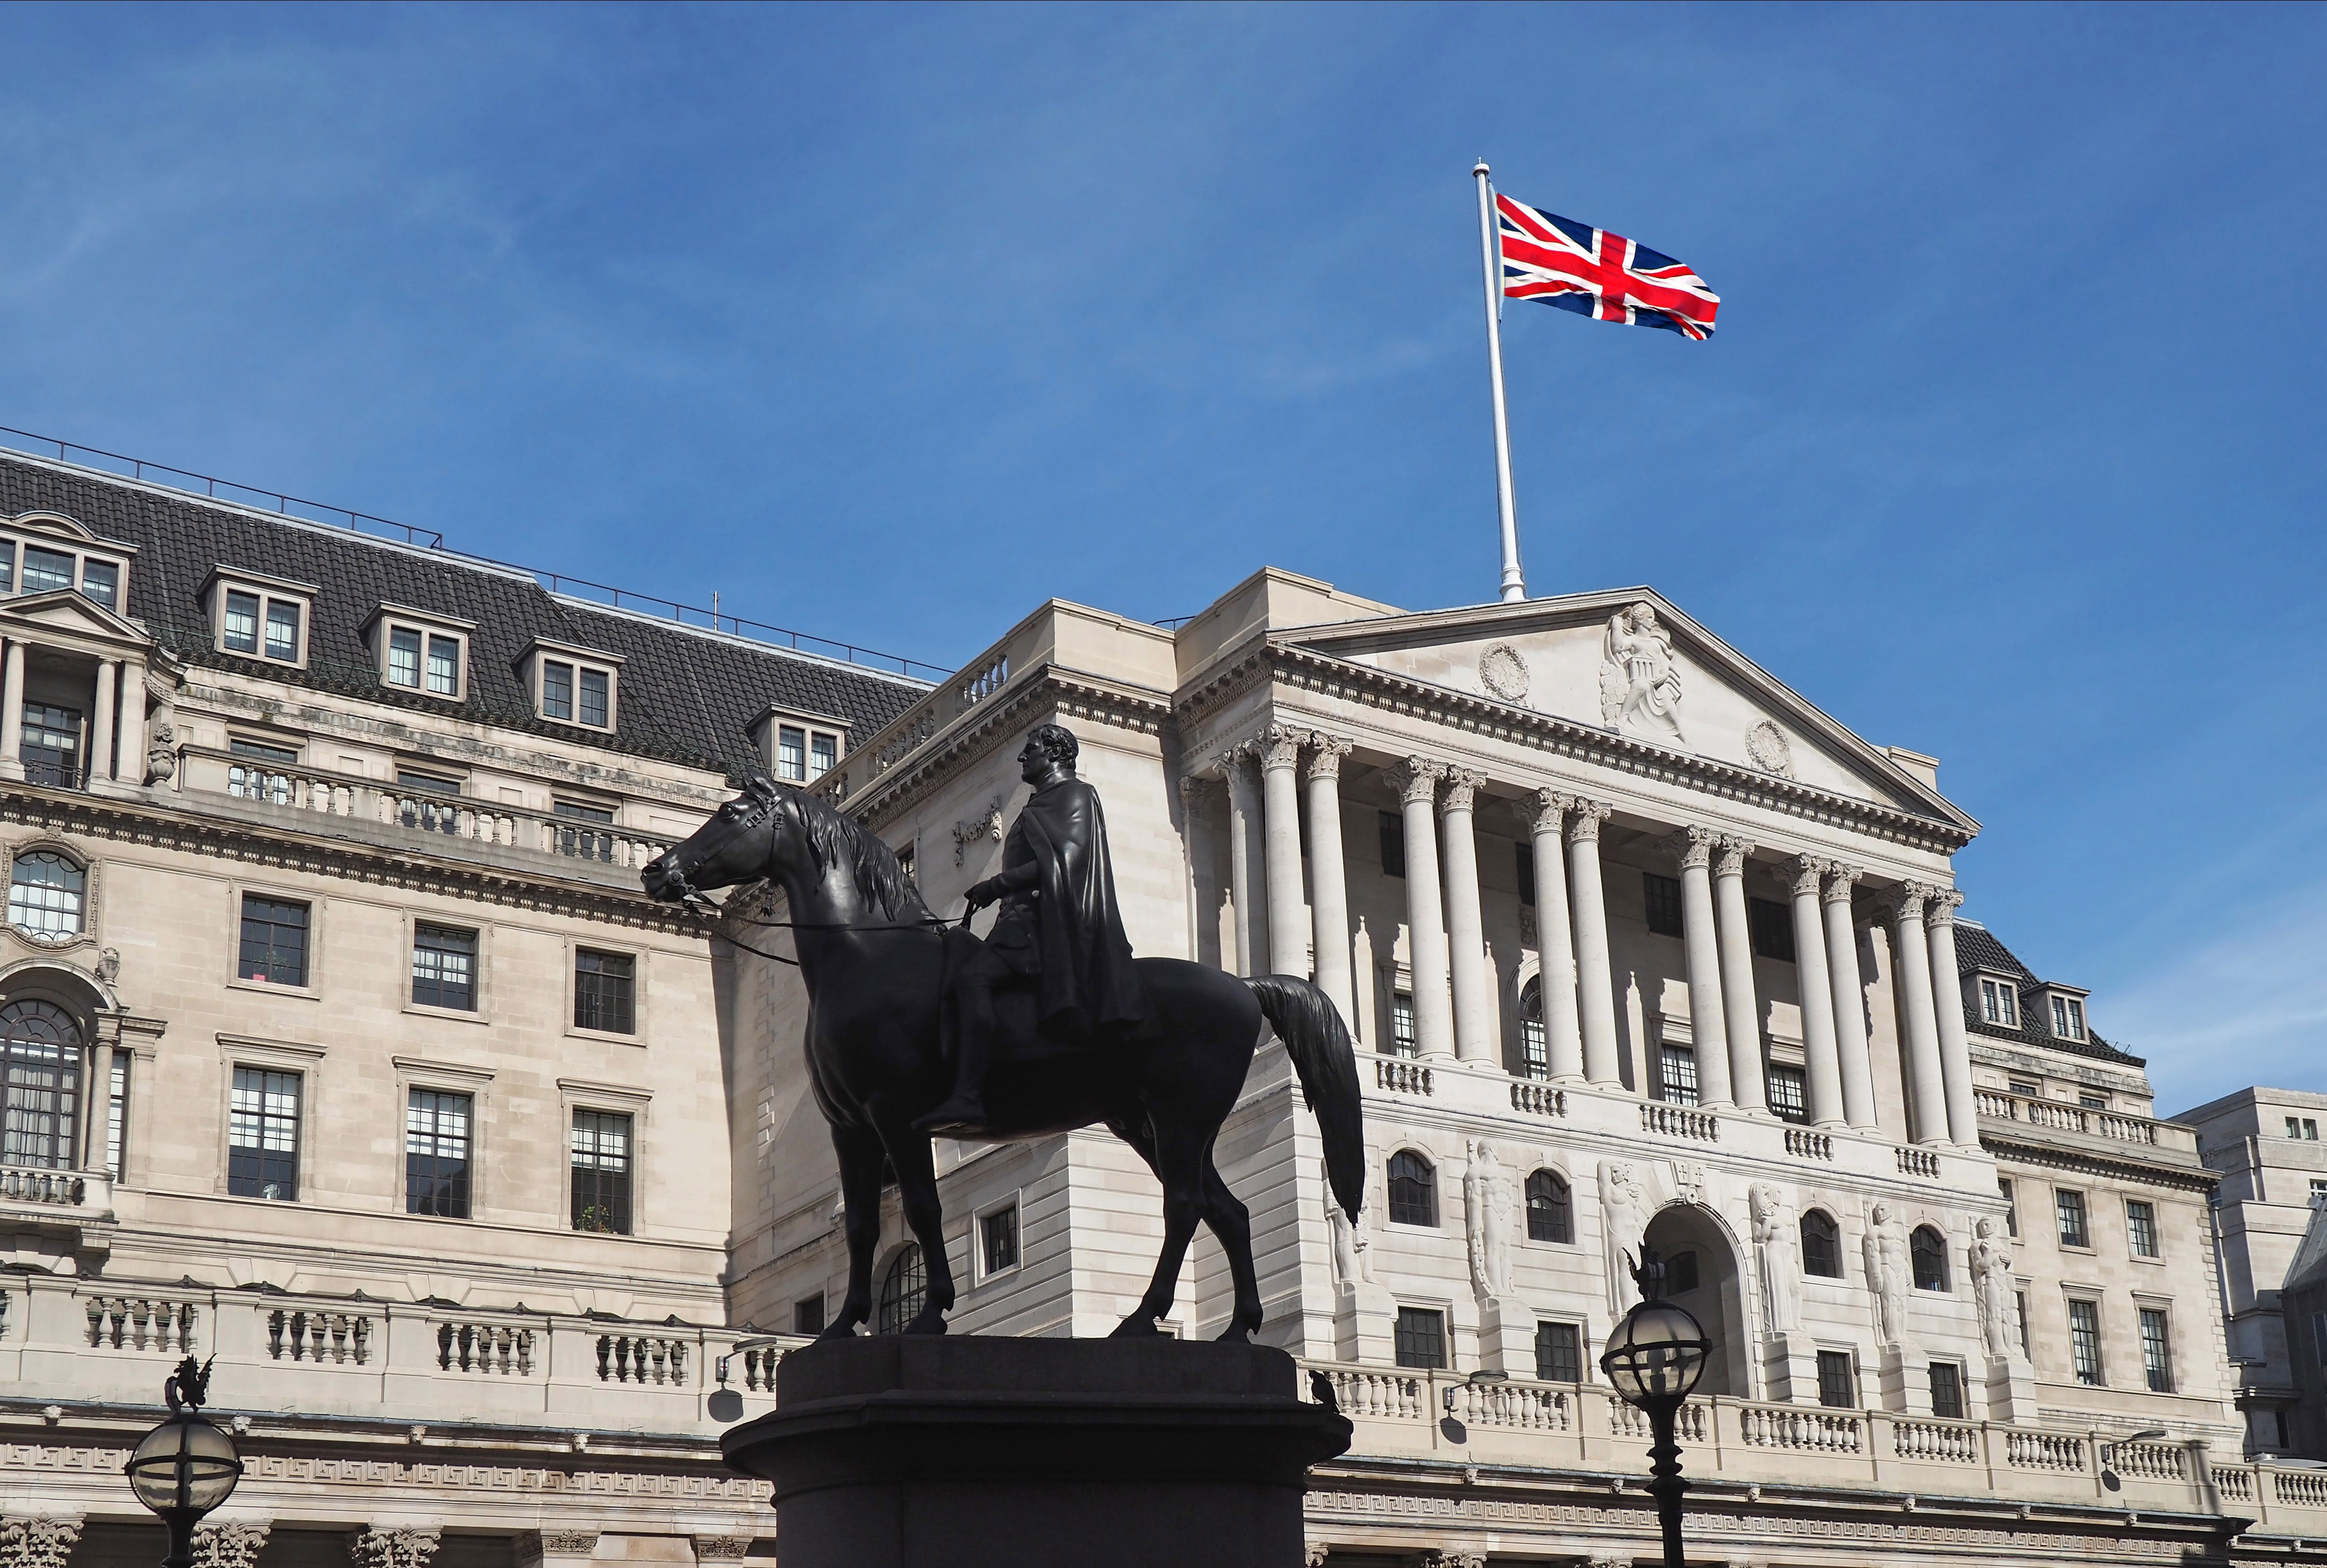 The Bank of England is watched over by a statue of the Duke of Wellington seated on his horse.